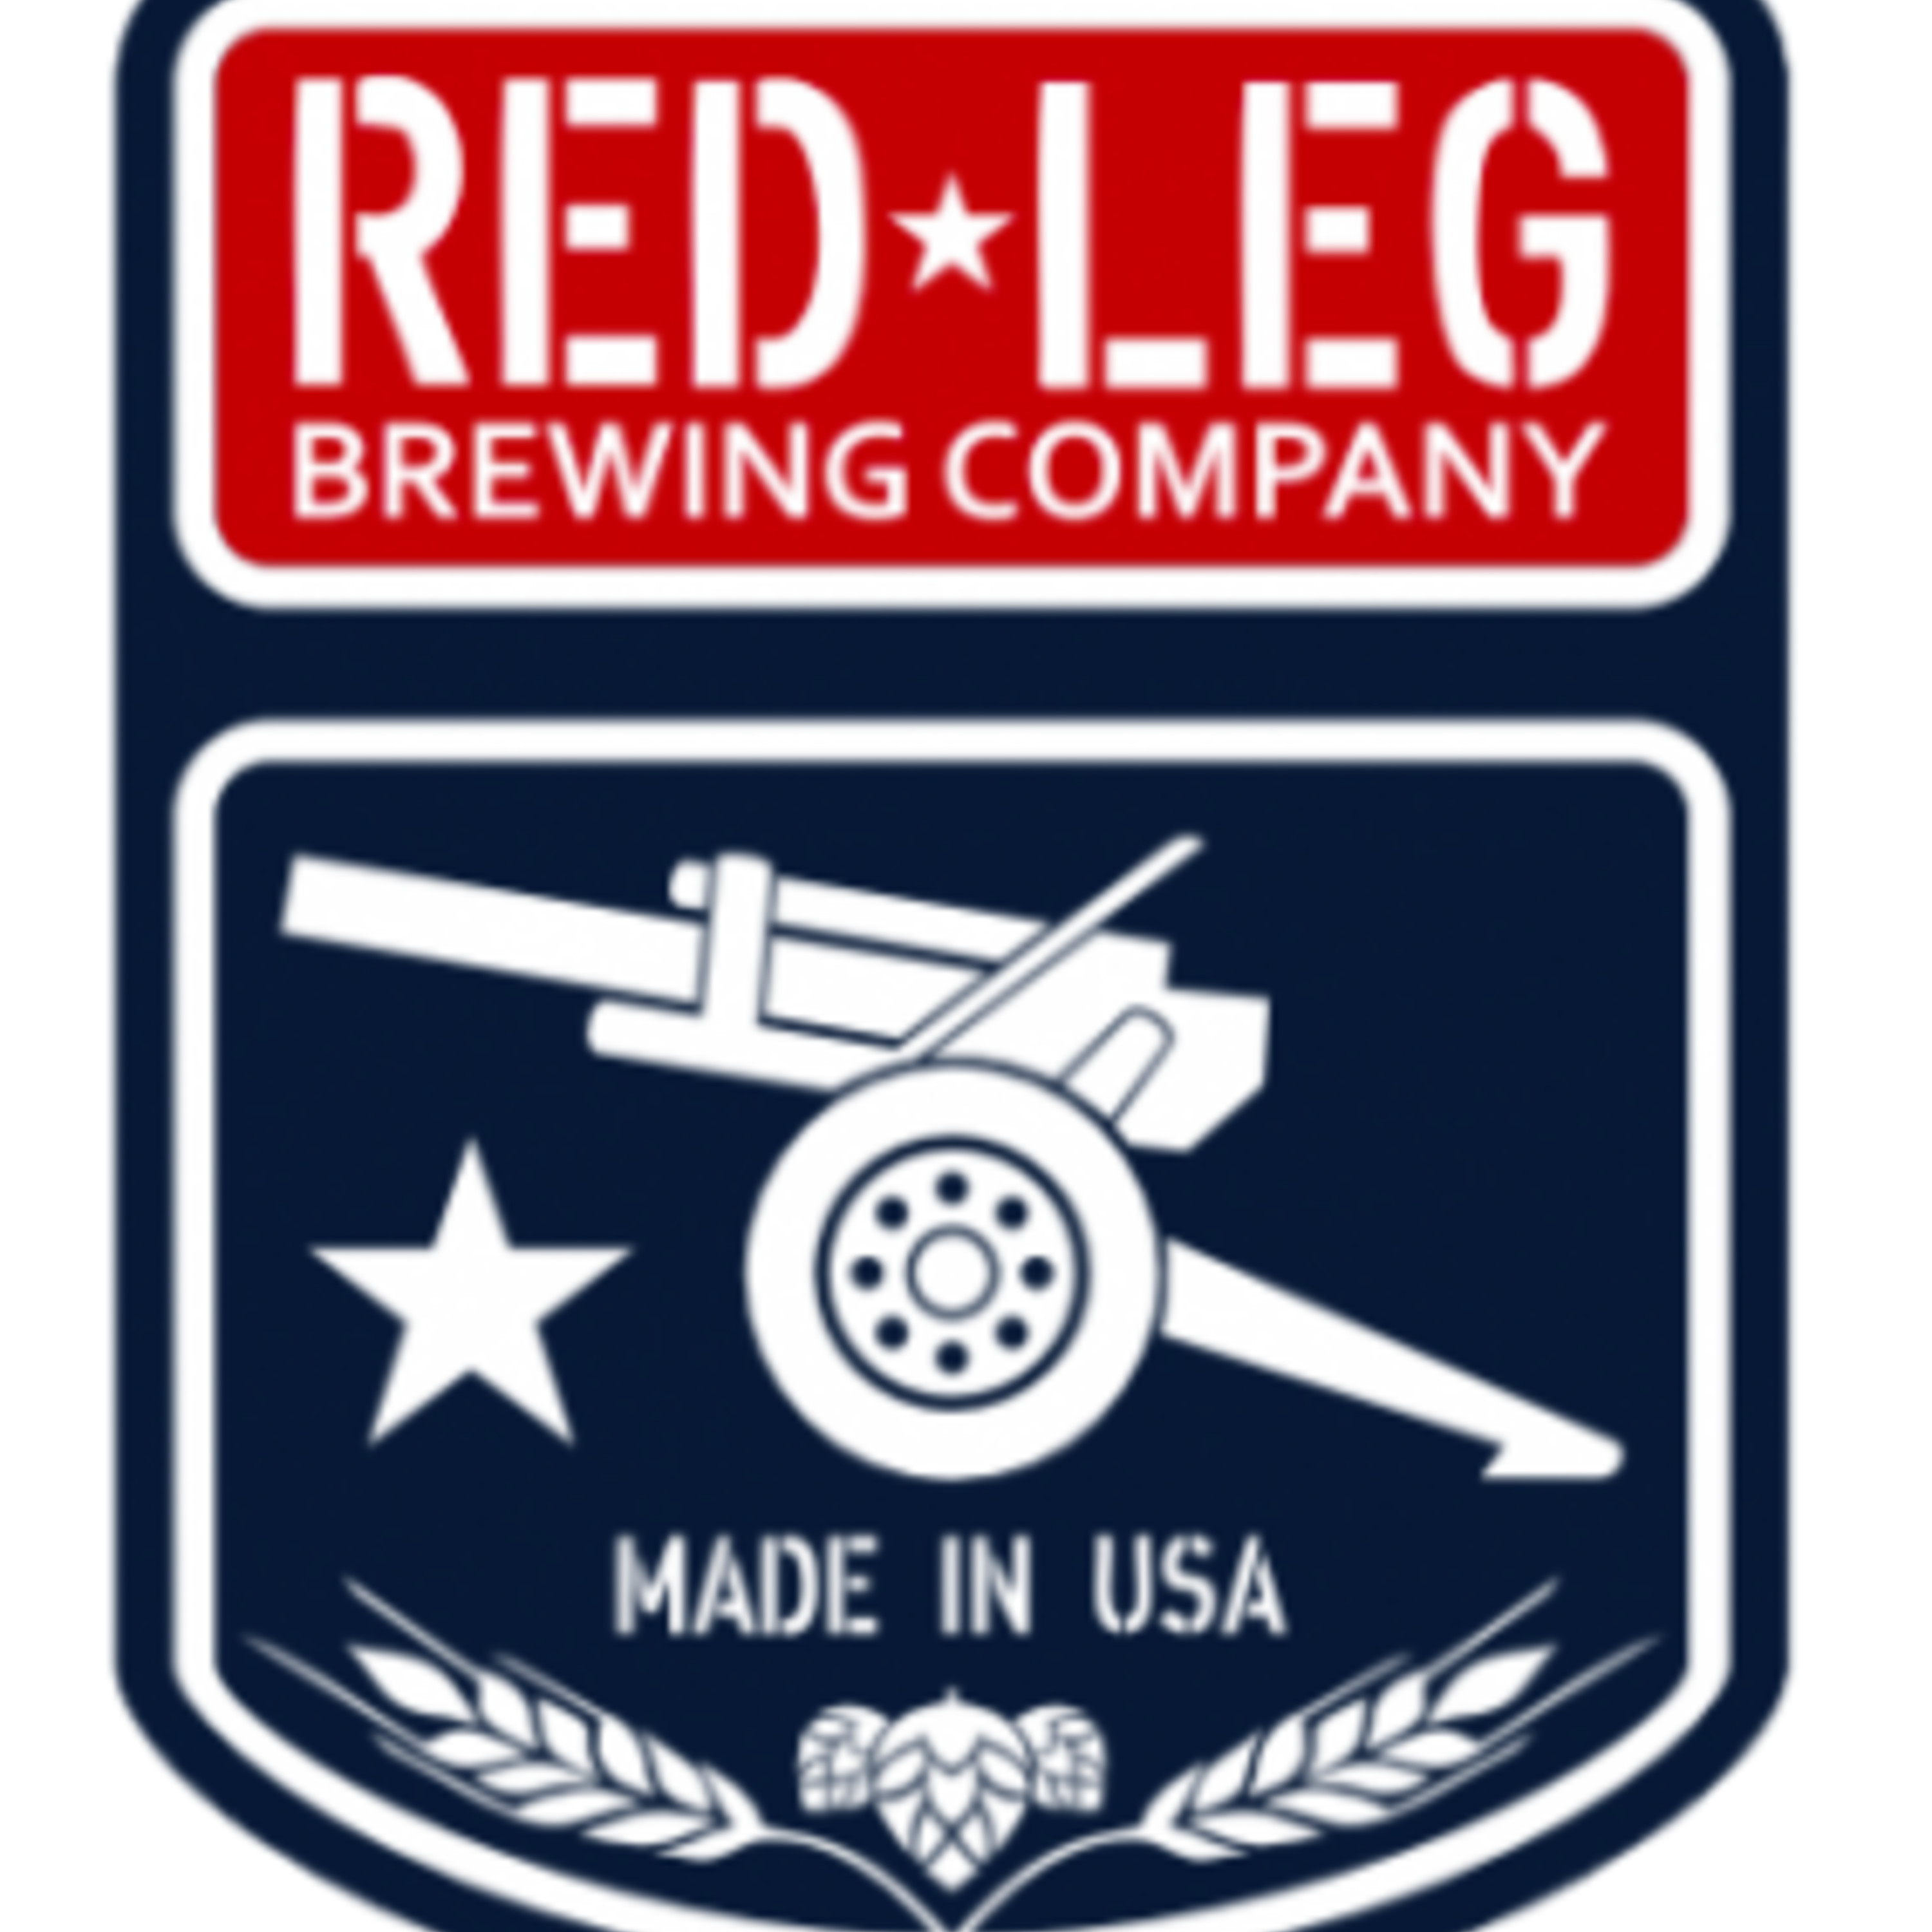 Beer! Episode 3: Red Leg Brewing Co.